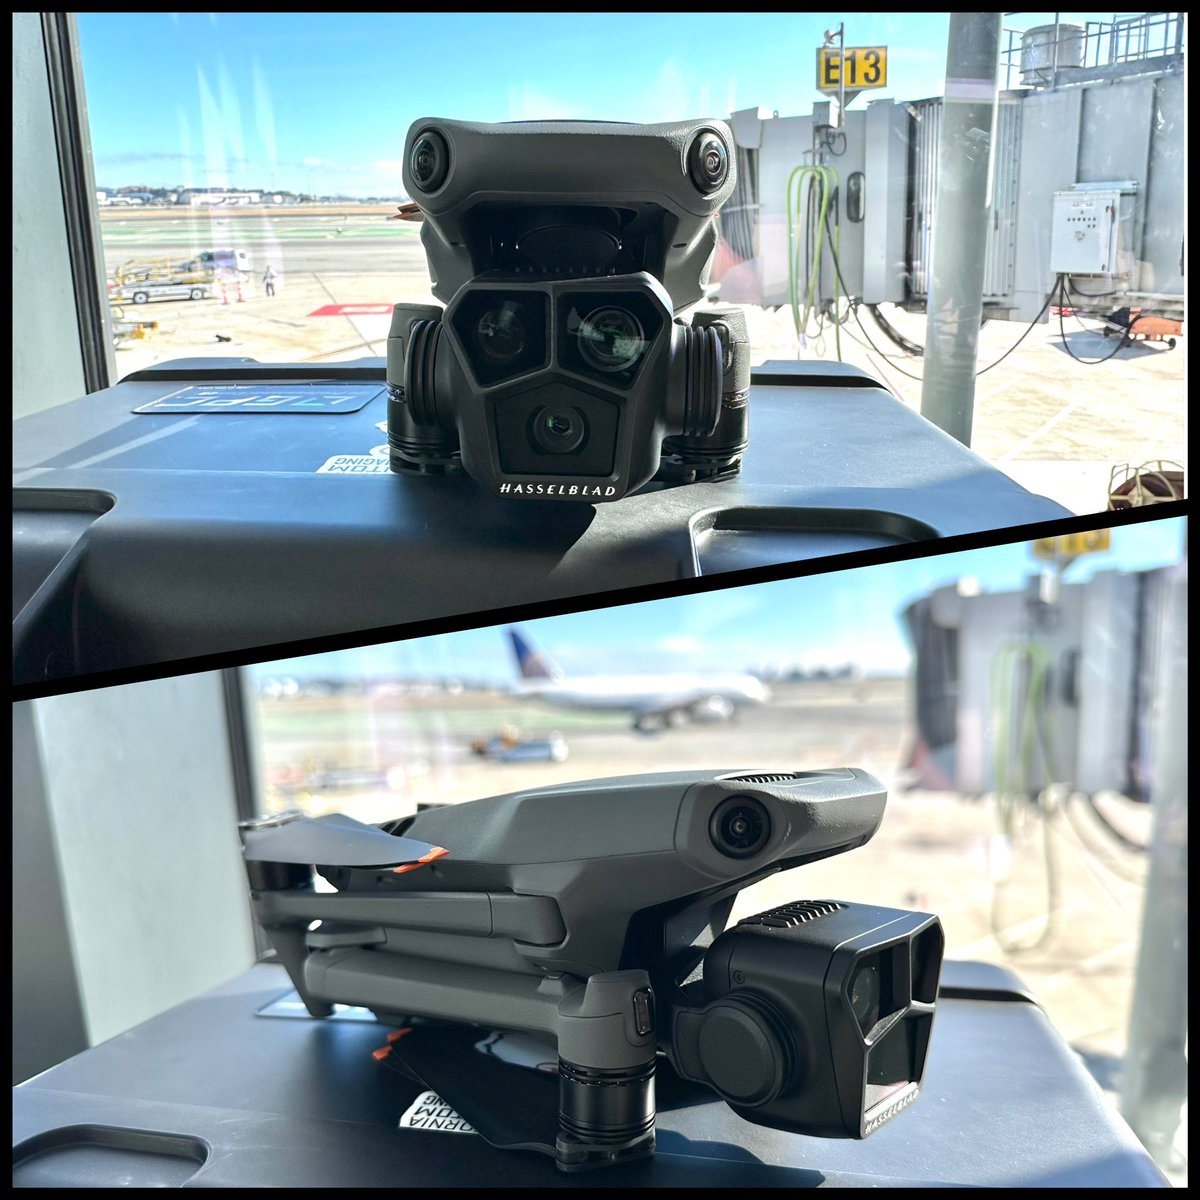 🛫 now boarding — with the @DJIGlobal #mavic3pro the destination is #Limitless  #dronephotography #drones #dronegear #djimavic3pro #DJI